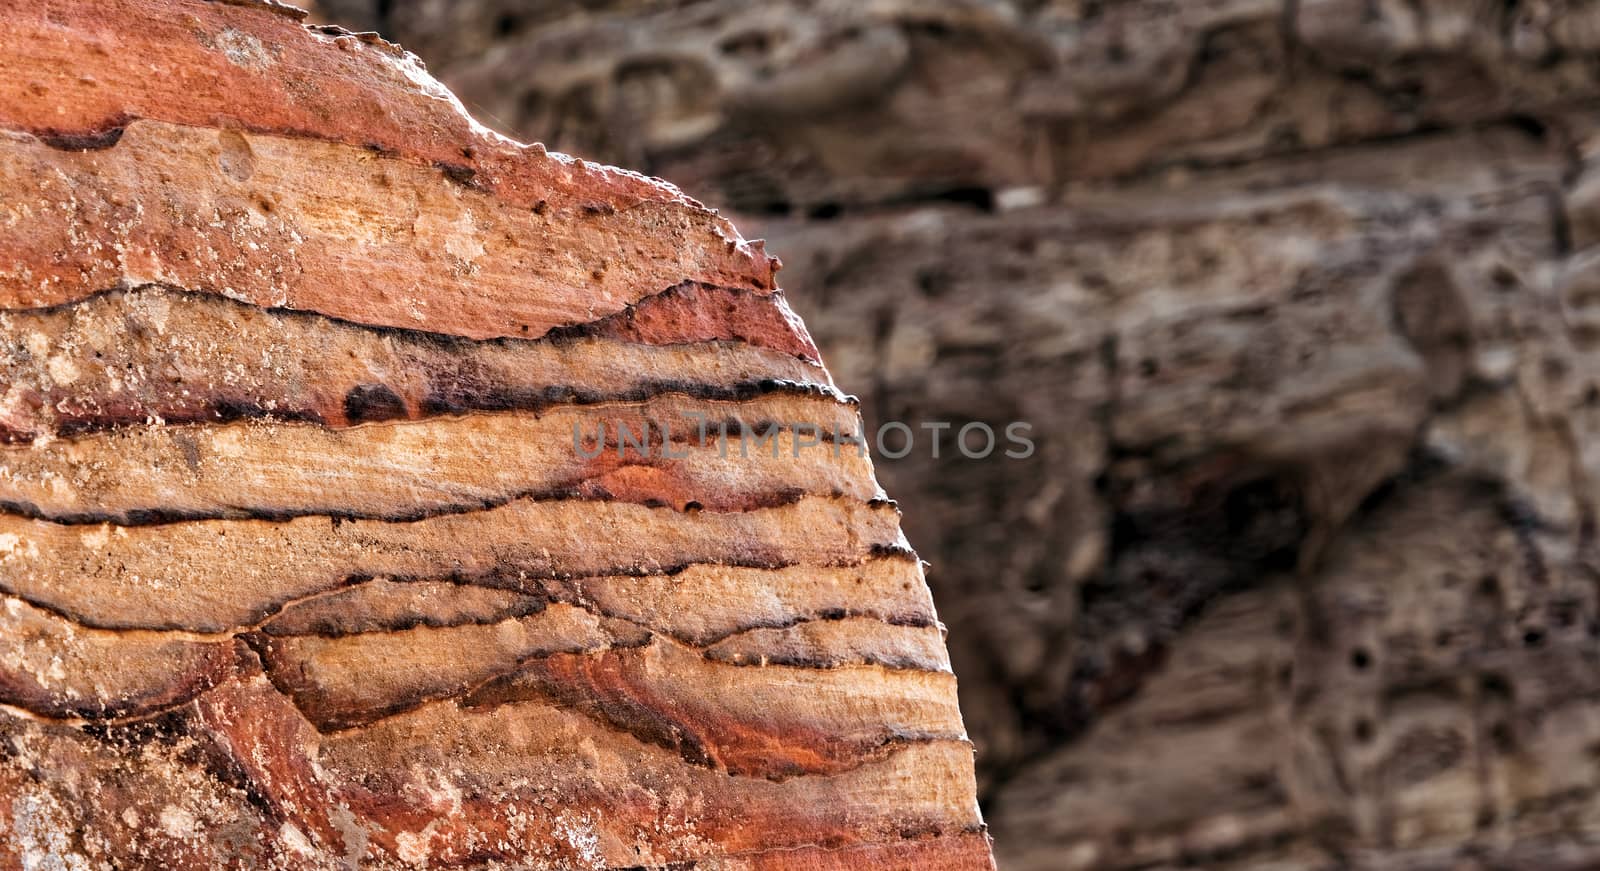 Sandstone coloured red, orange and black by iron and manganese compounds in the World Heritage of Petra, Jordan